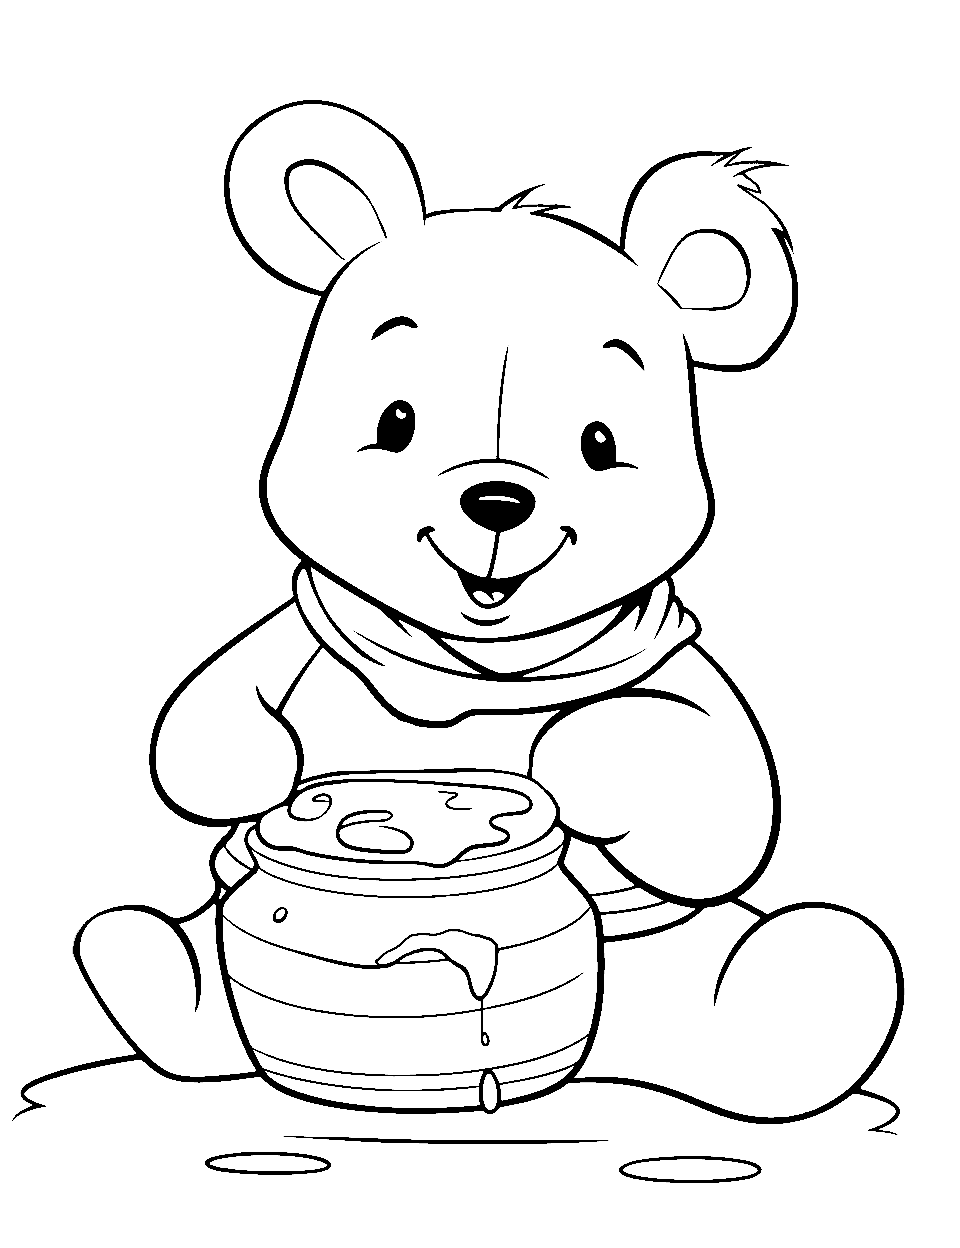 Sweet Honey Treat Coloring Page - Pooh Bear enjoying a sweet treat from a honey pot with honey dripping down.